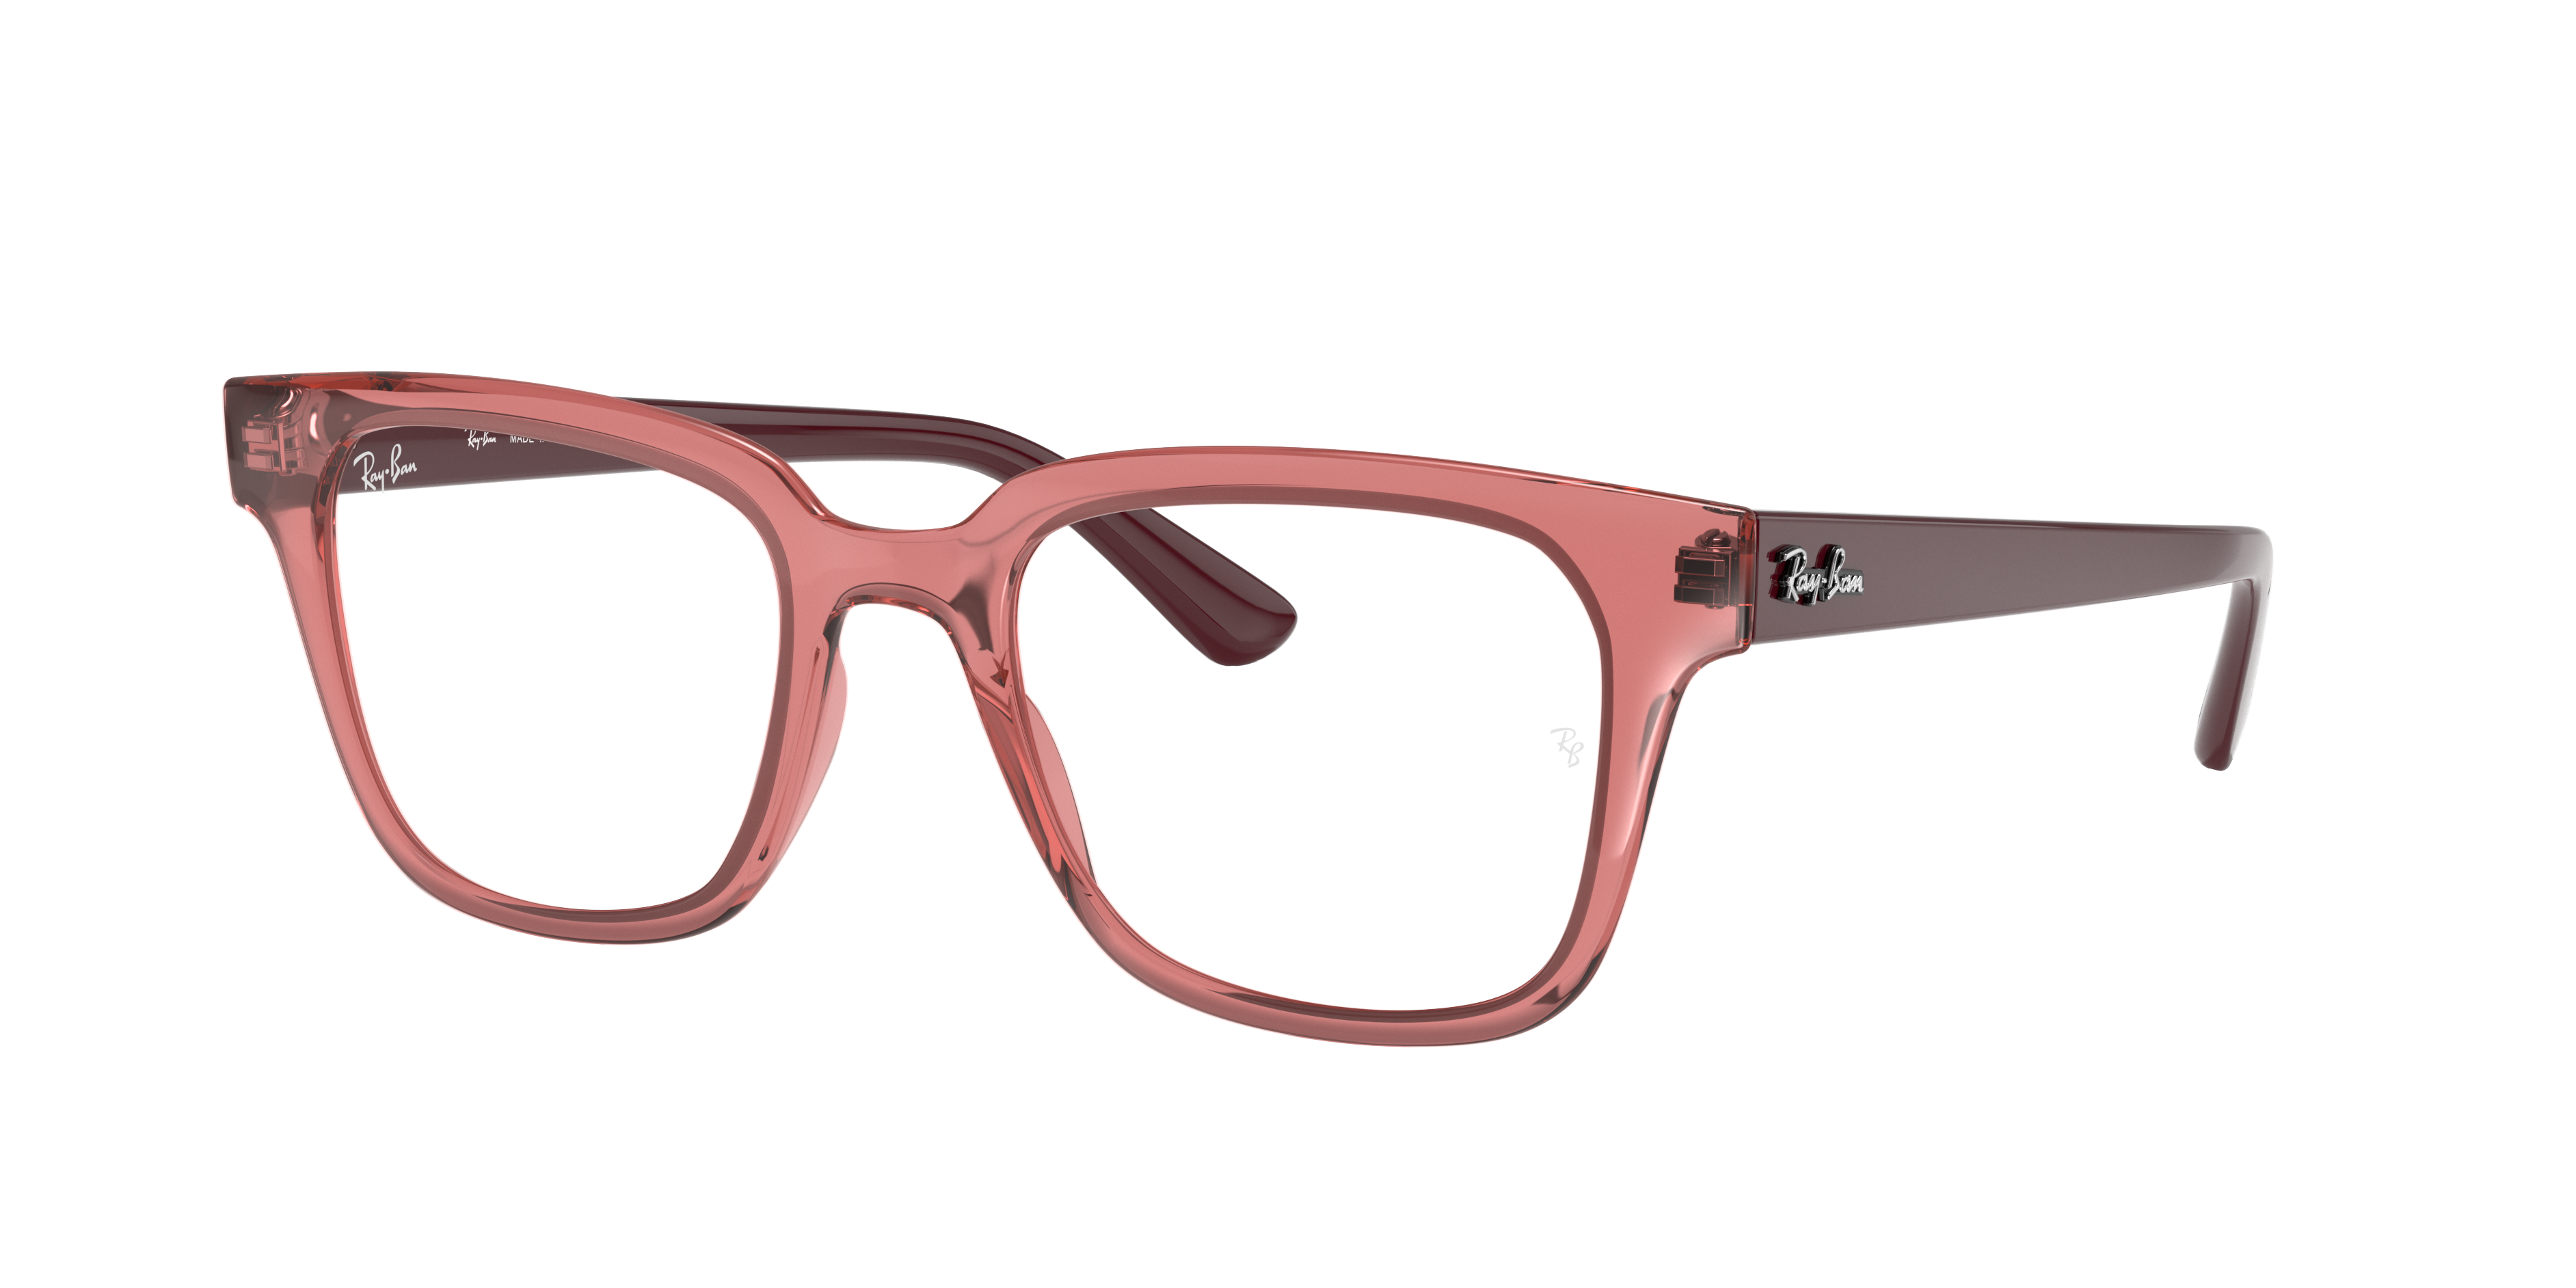 Ray-Ban Glasses and Sunglasses | Target 